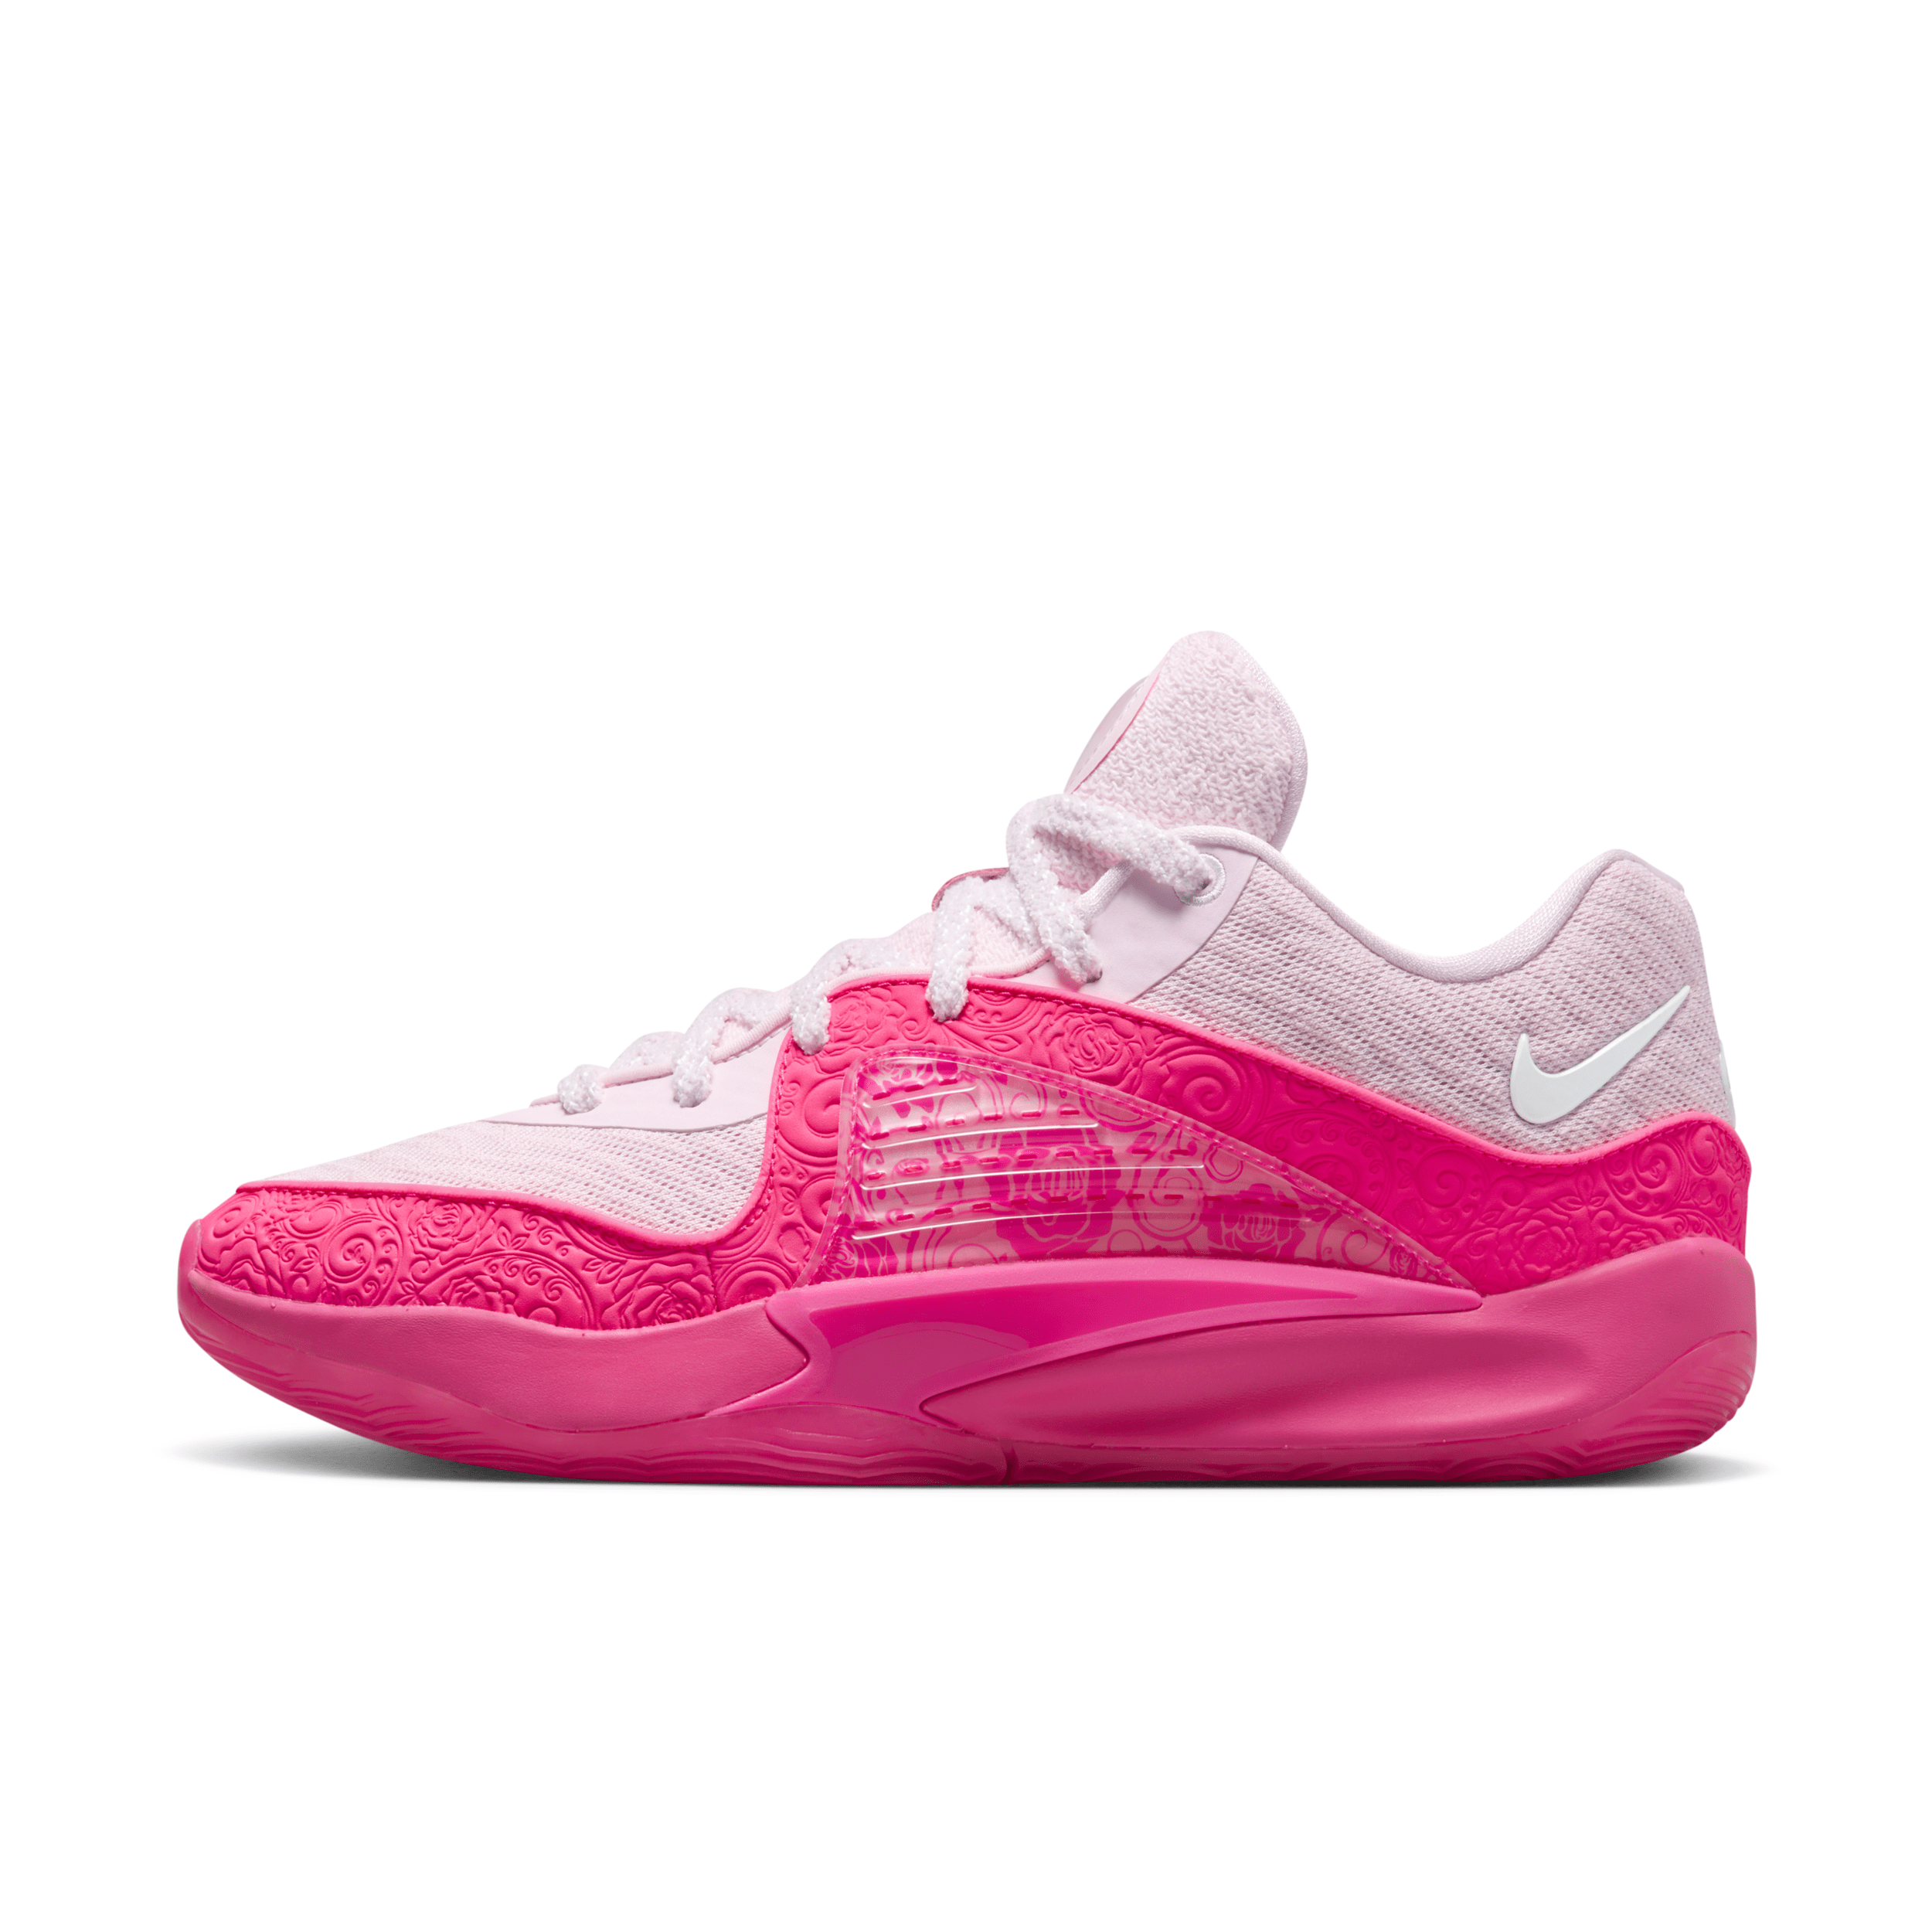 NIKE MEN'S KD16 "AUNT PEARL" BASKETBALL SHOES,1013254206